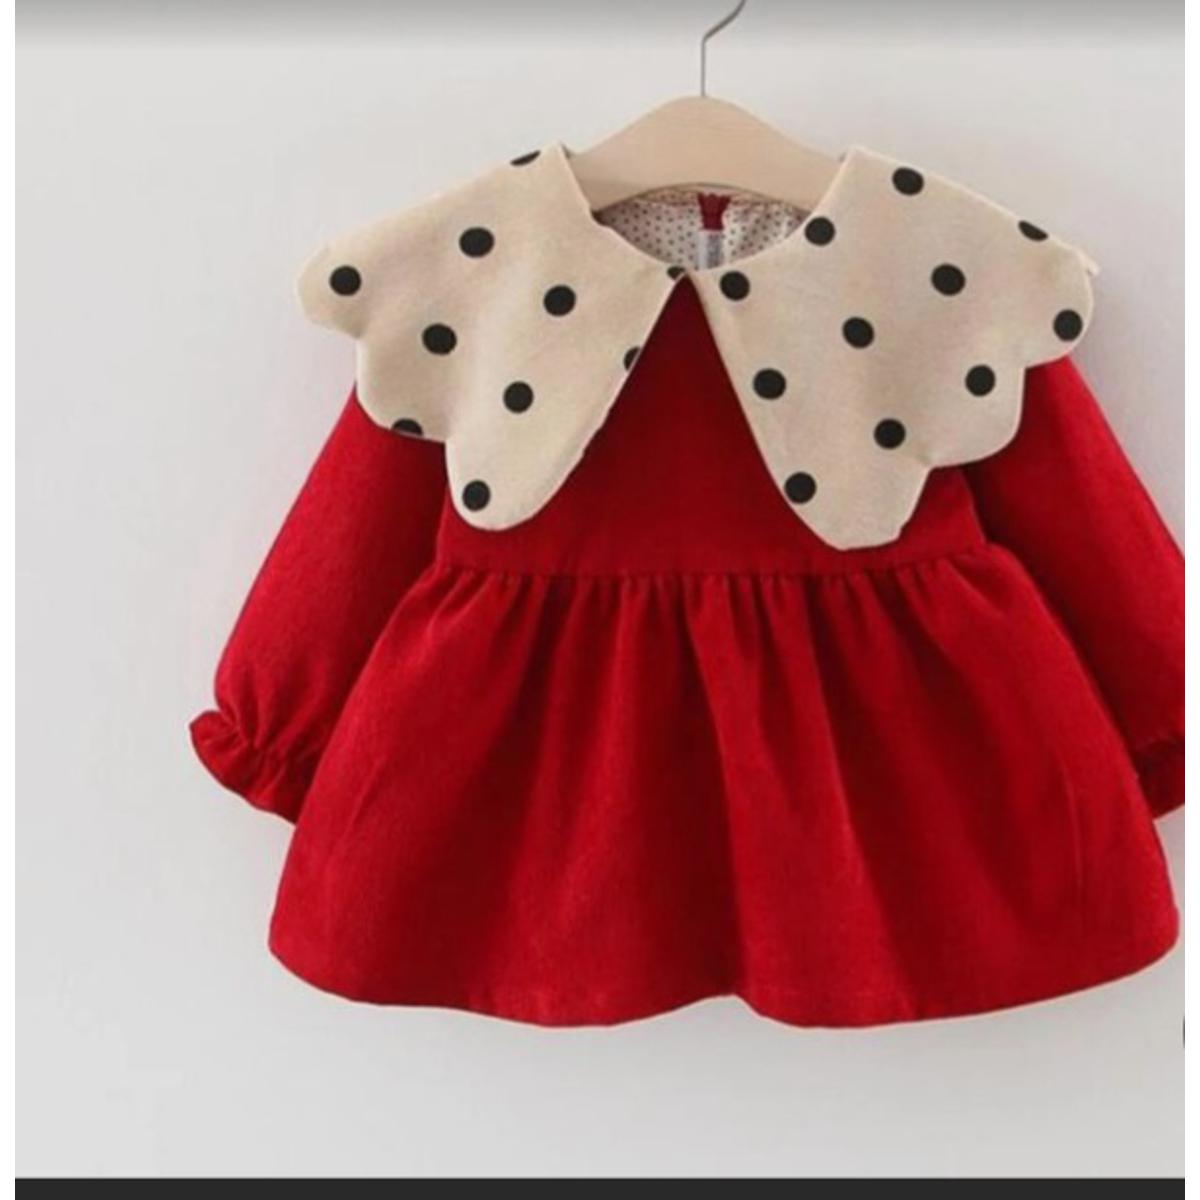 Stylish Baby Winter Frock Cutting And Stitching  Frock For Girls  Winter  Baby Top  YouTube